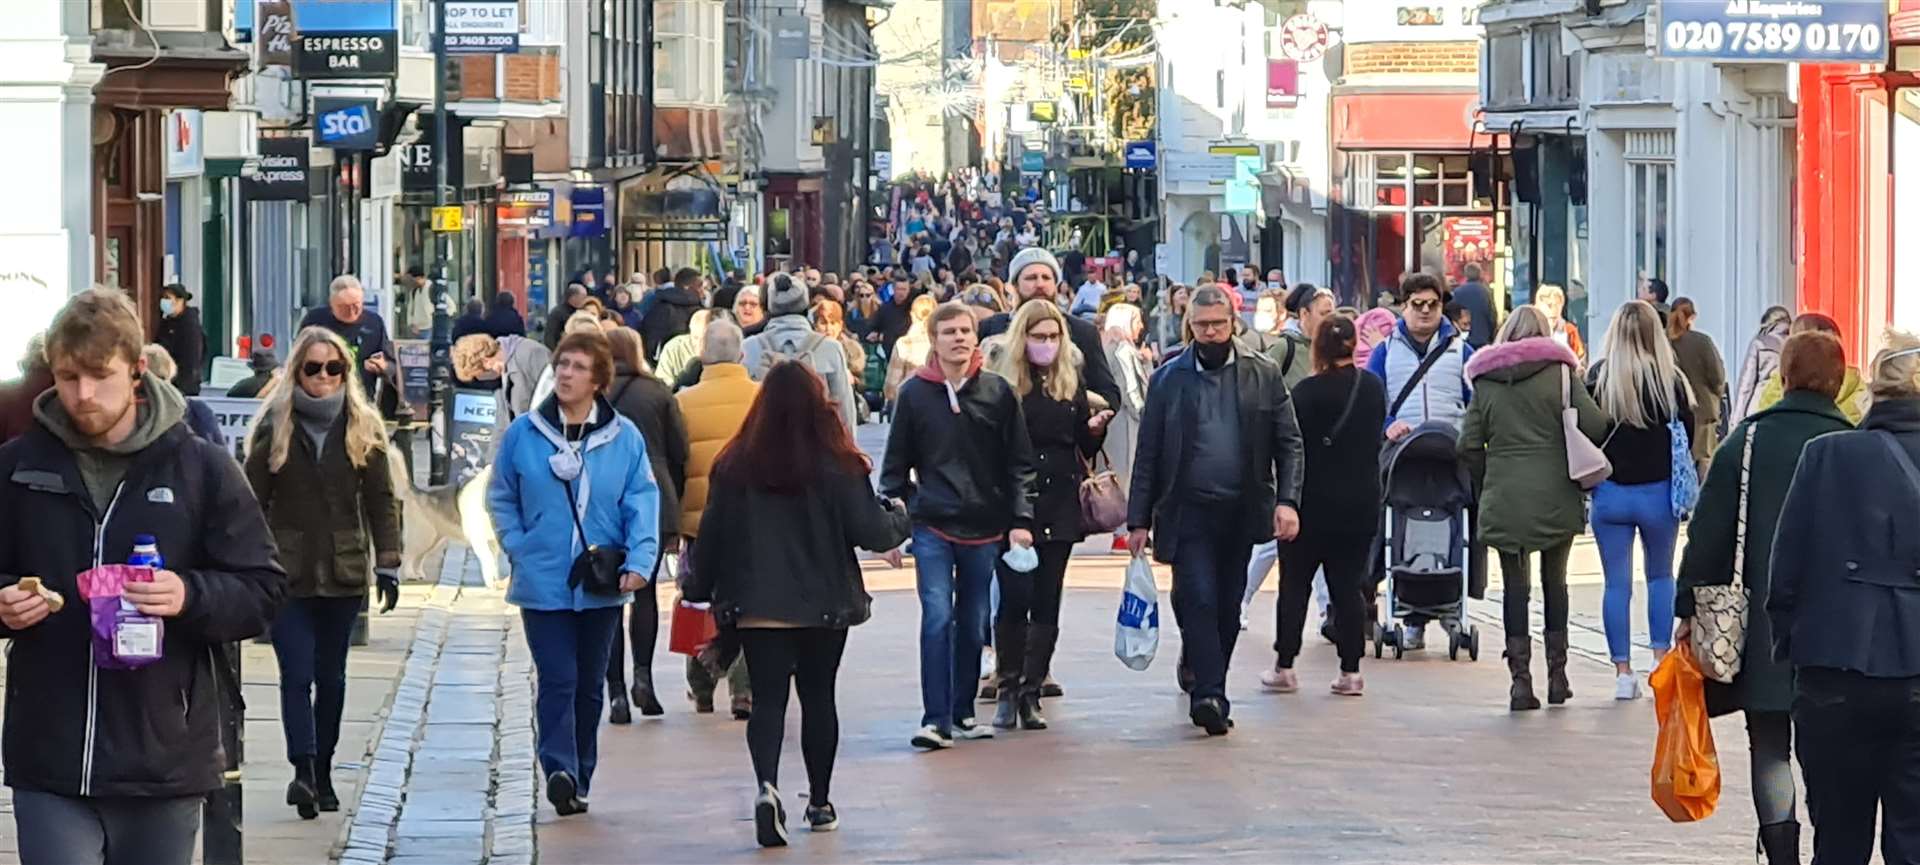 Shoppers poured into Canterbury for the last day before the November lockdown began.